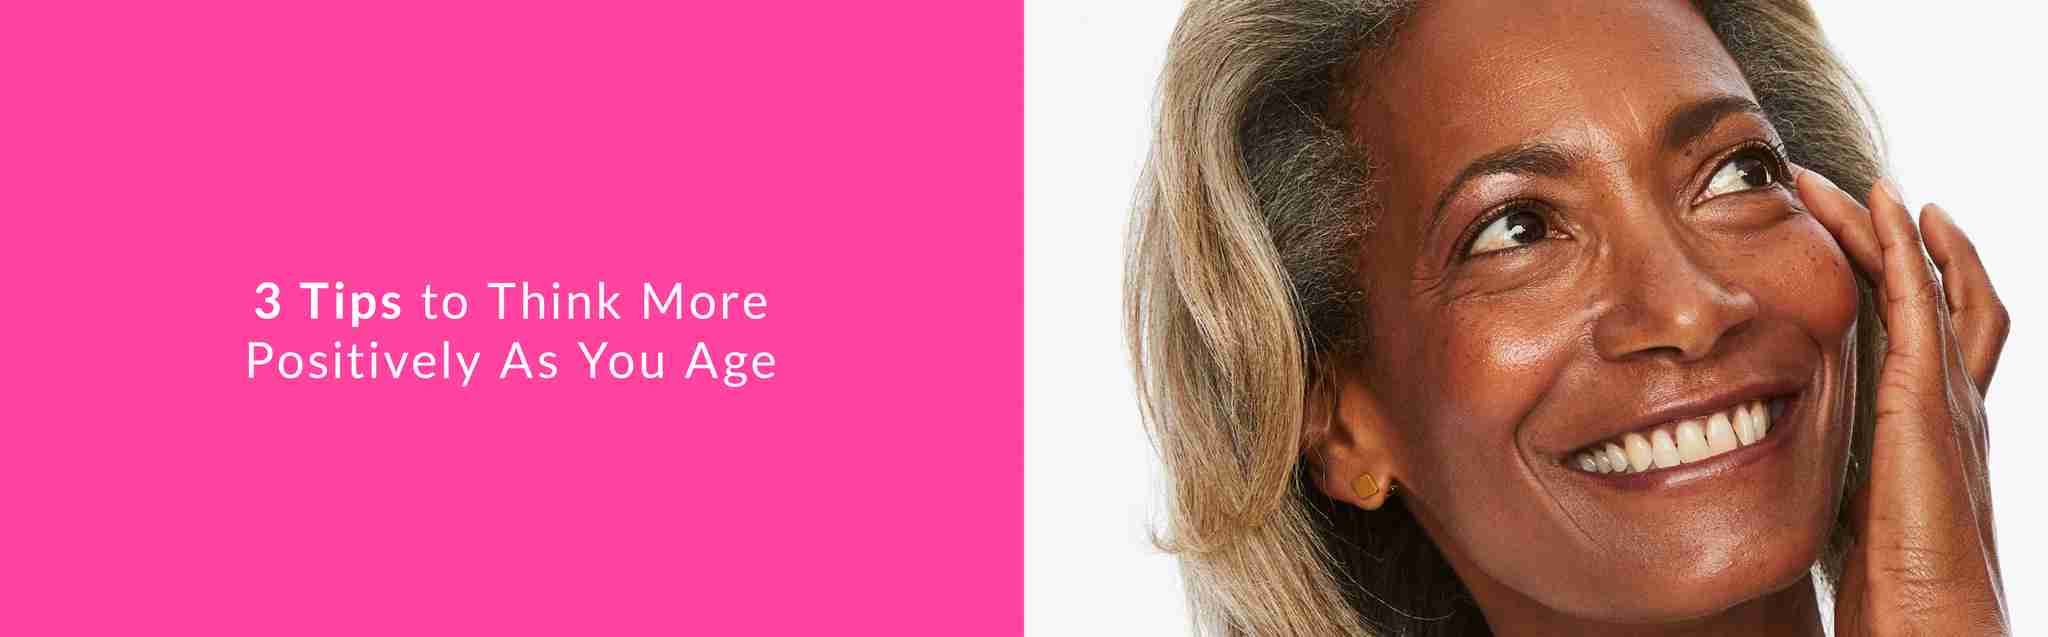 tips to think more positively as you age